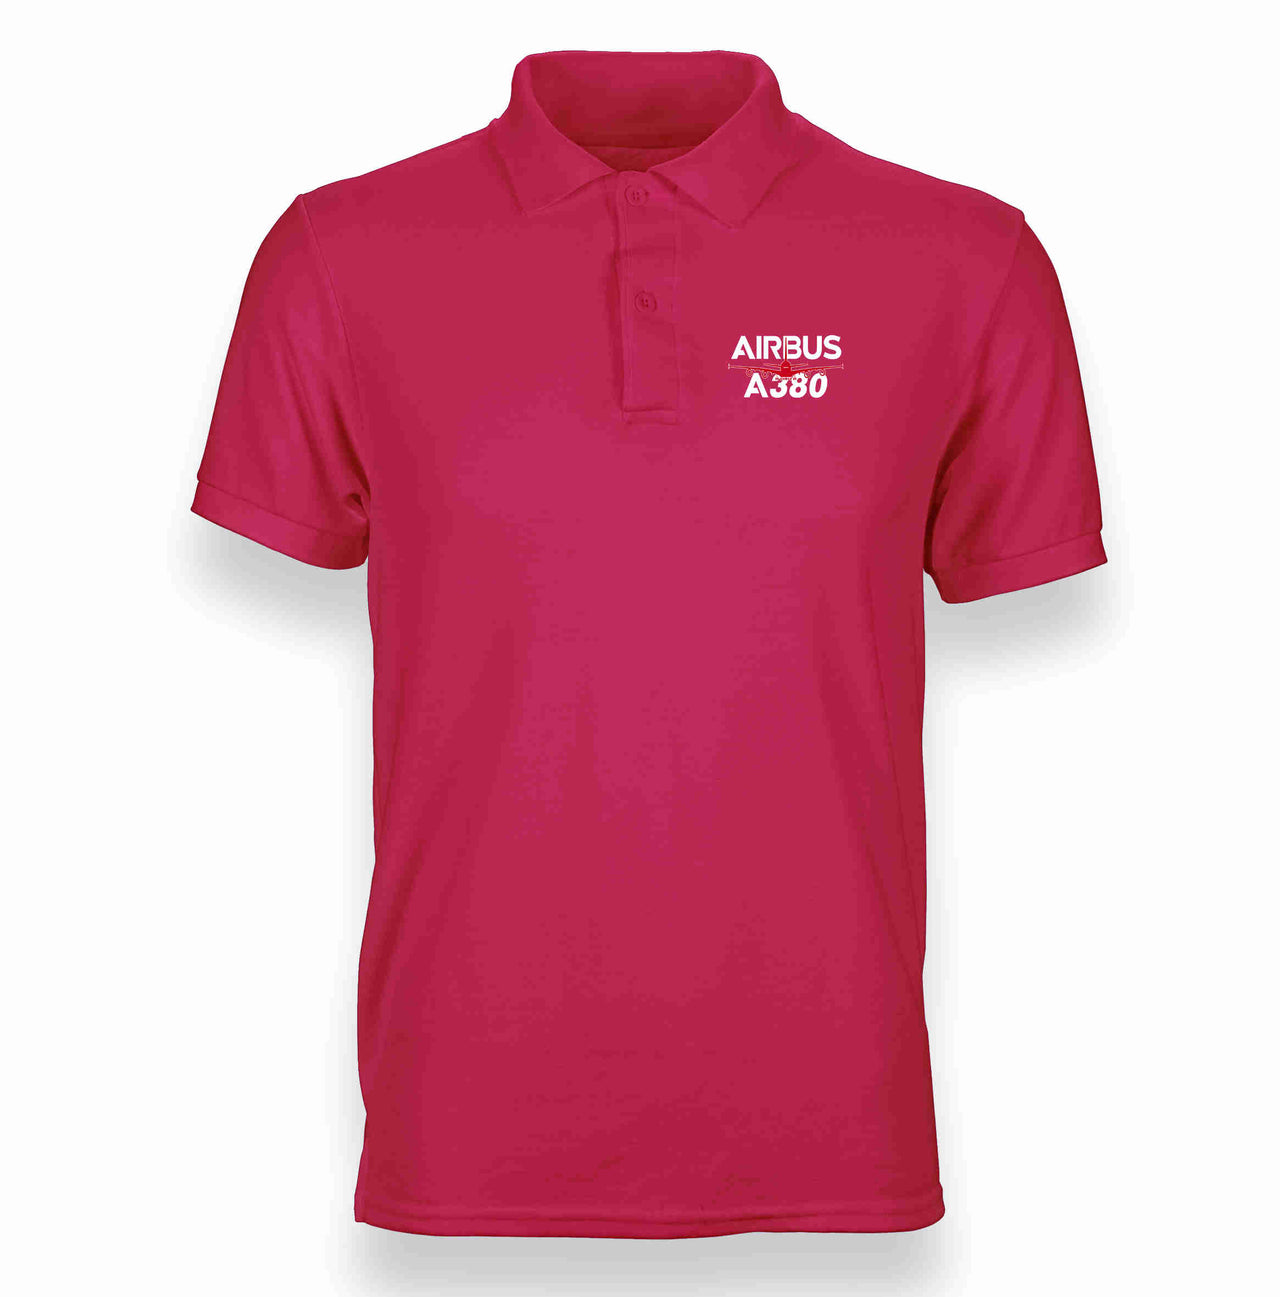 Amazing Airbus A380 Designed "WOMEN" Polo T-Shirts